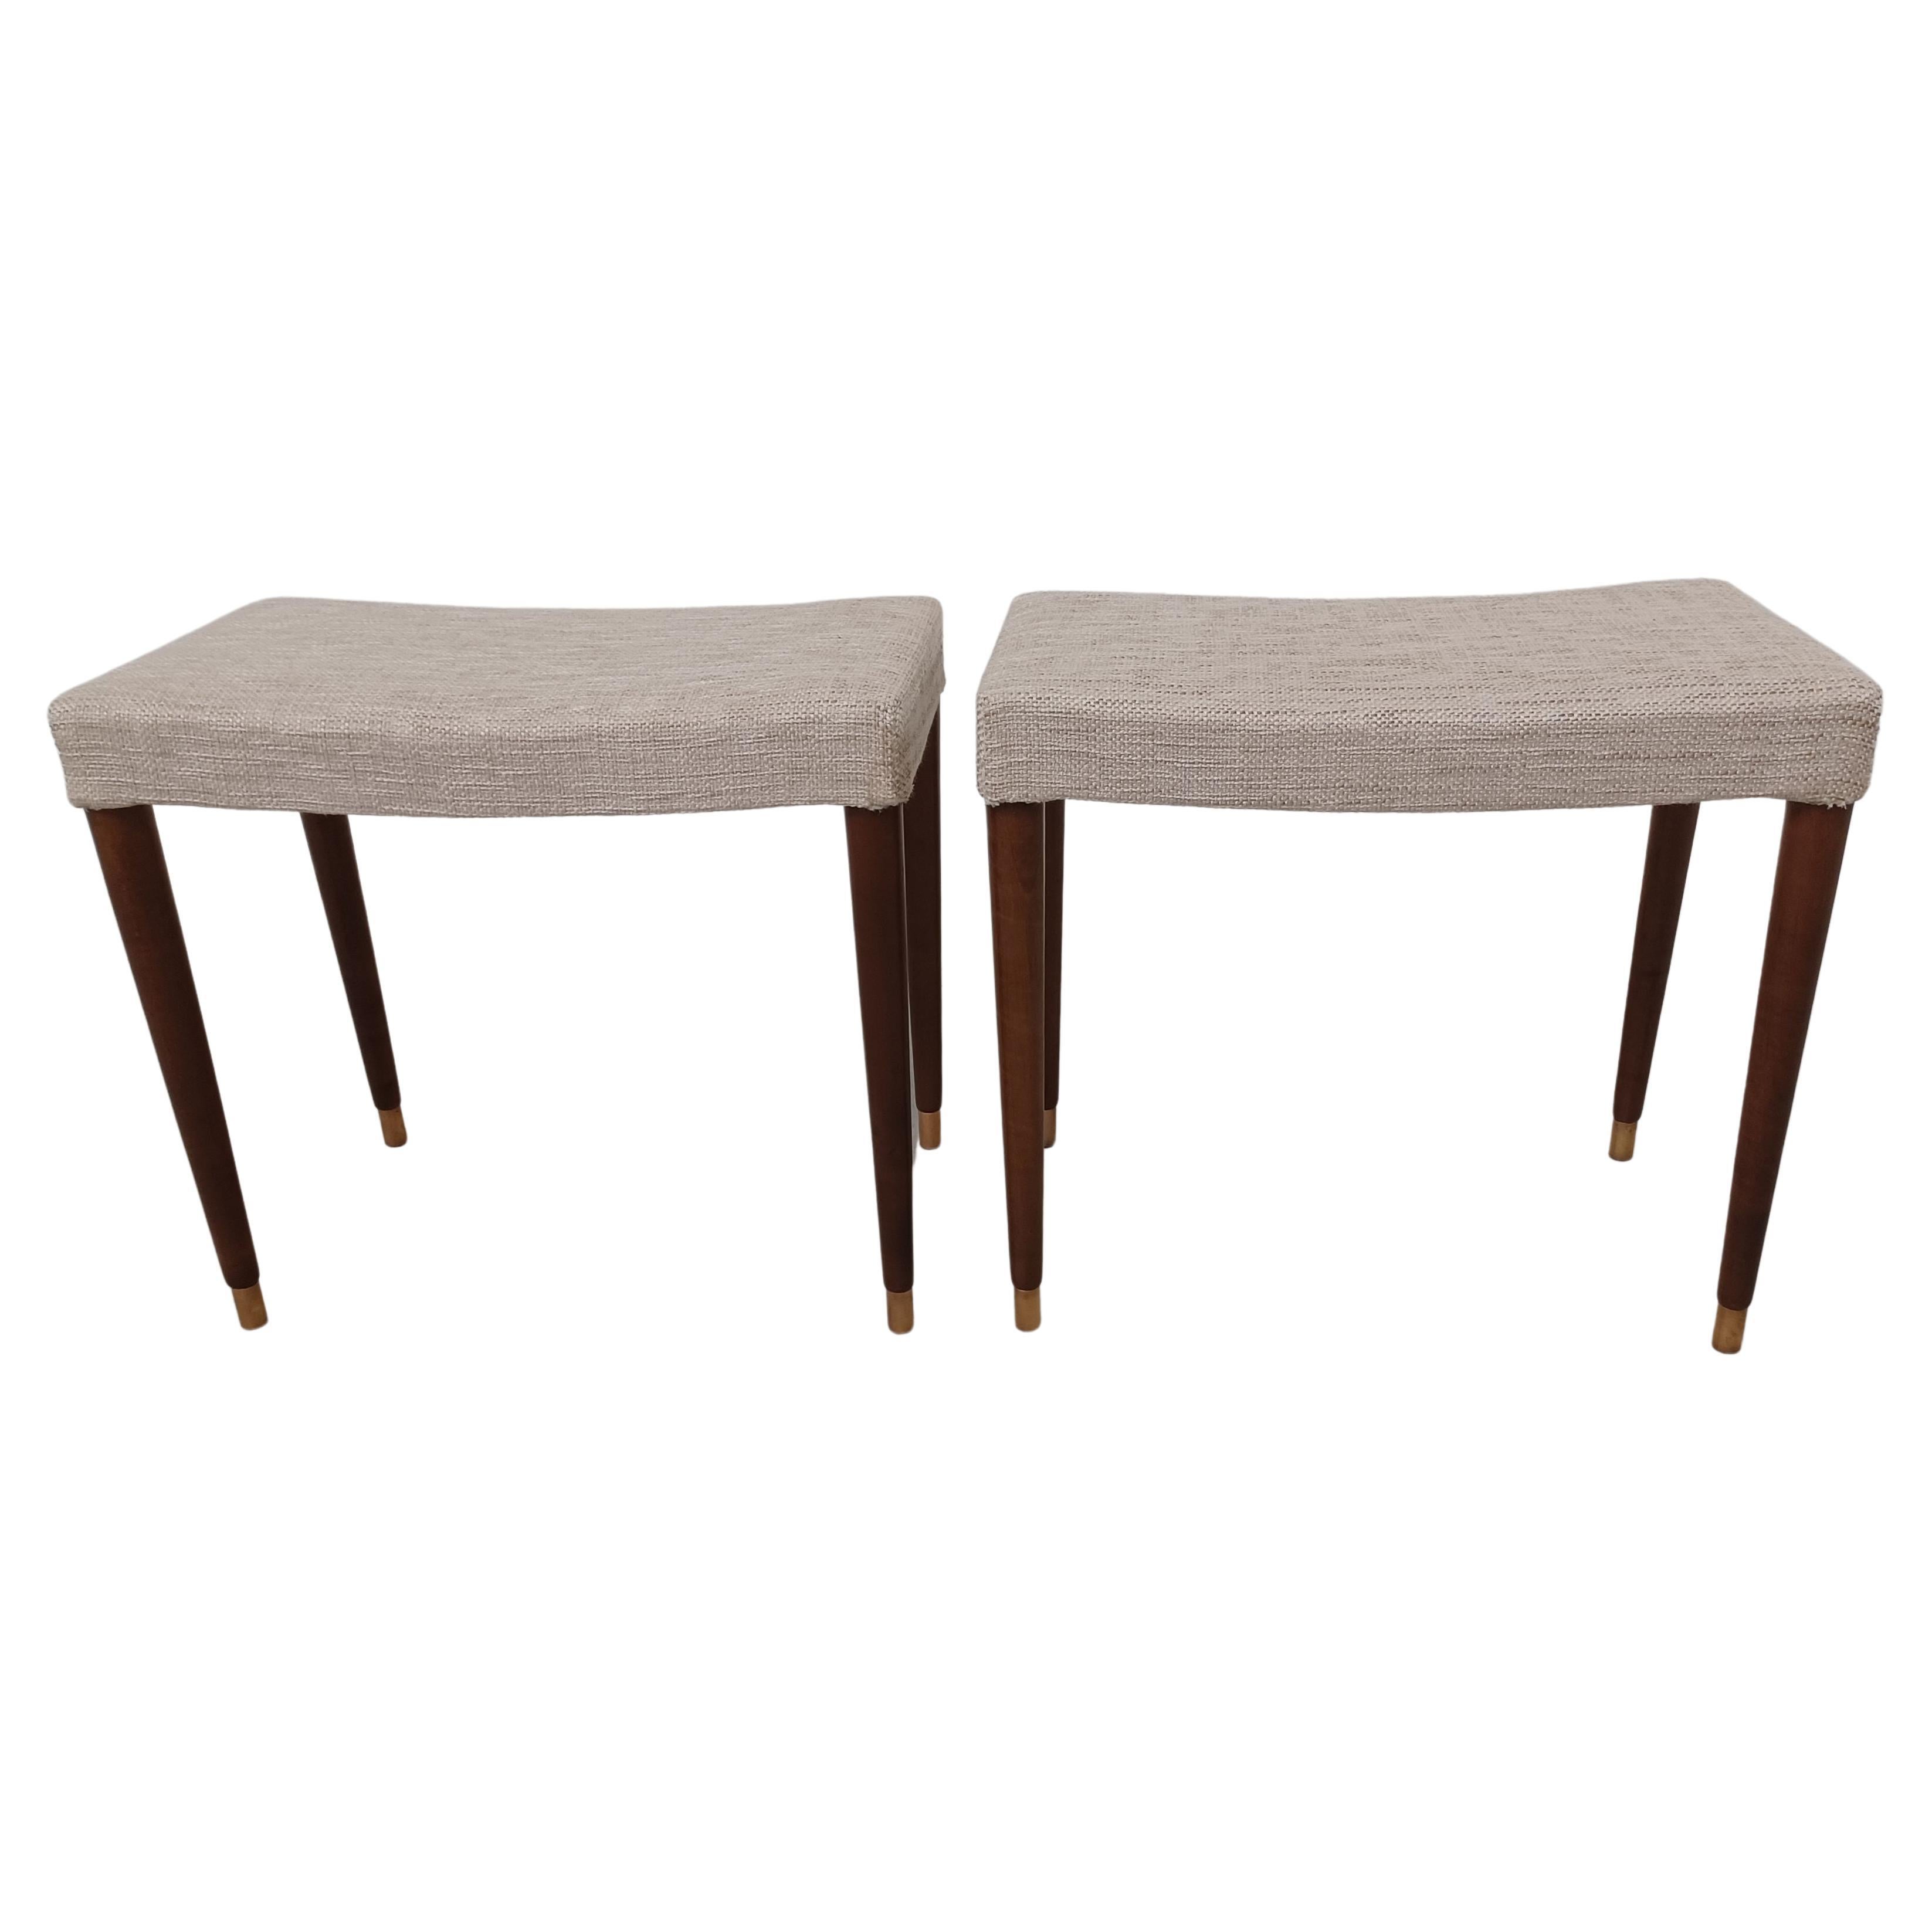 1950's Set of Two Restored an Reupholstered Danish Mid-Century Modern stools For Sale